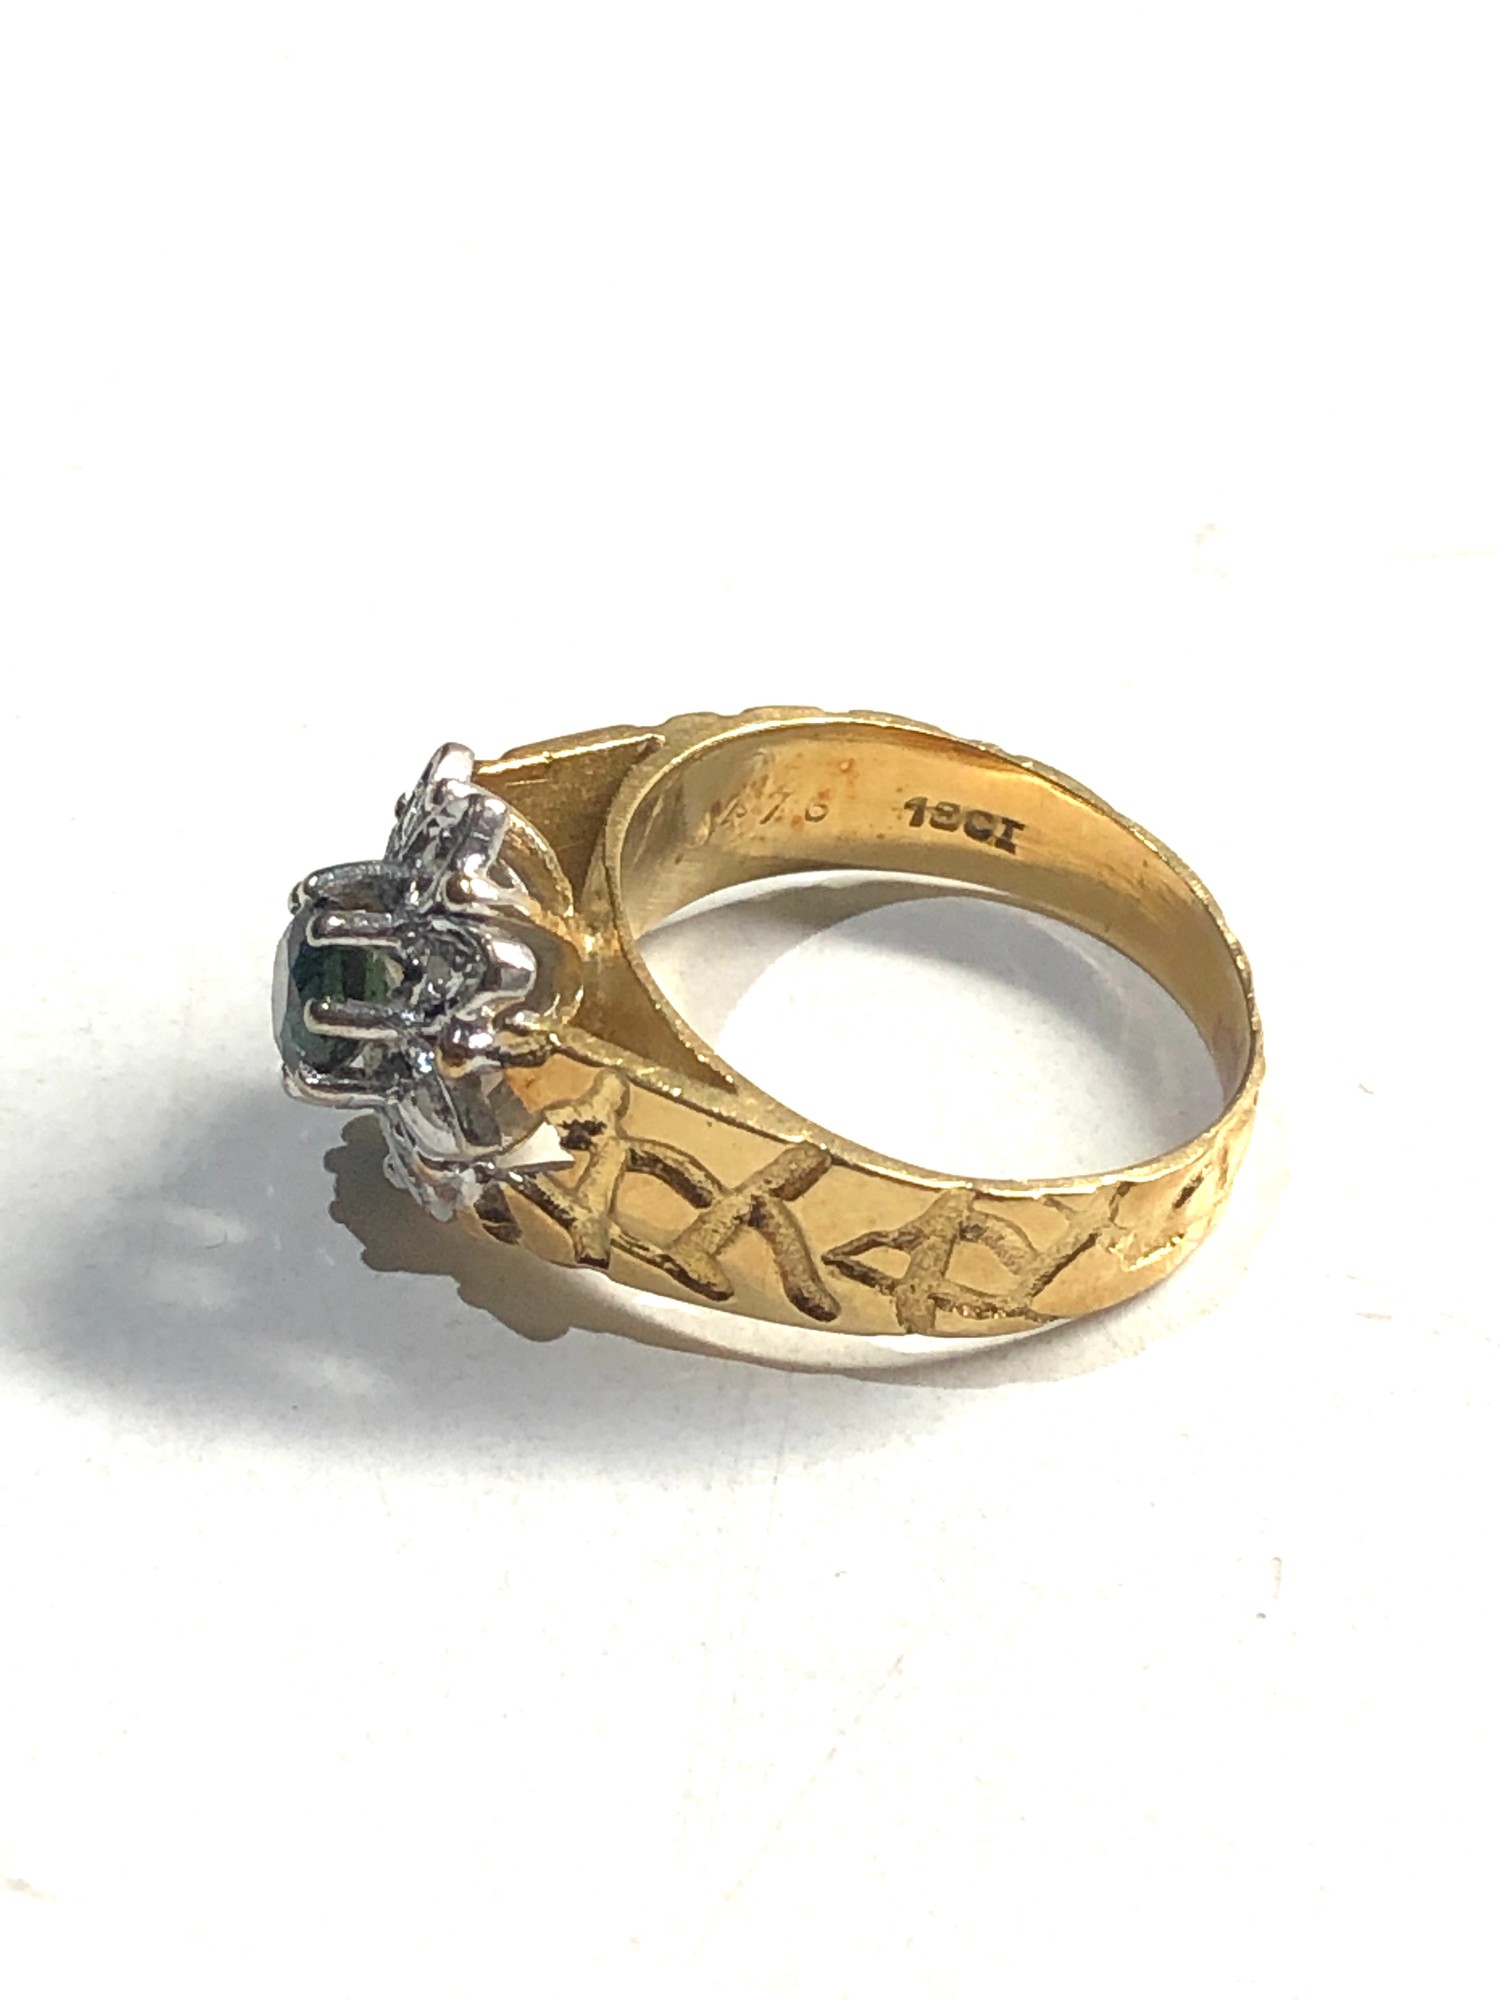 Vintage 18ct gold ring set with sapphire & diamonds 5.8g - Image 3 of 4